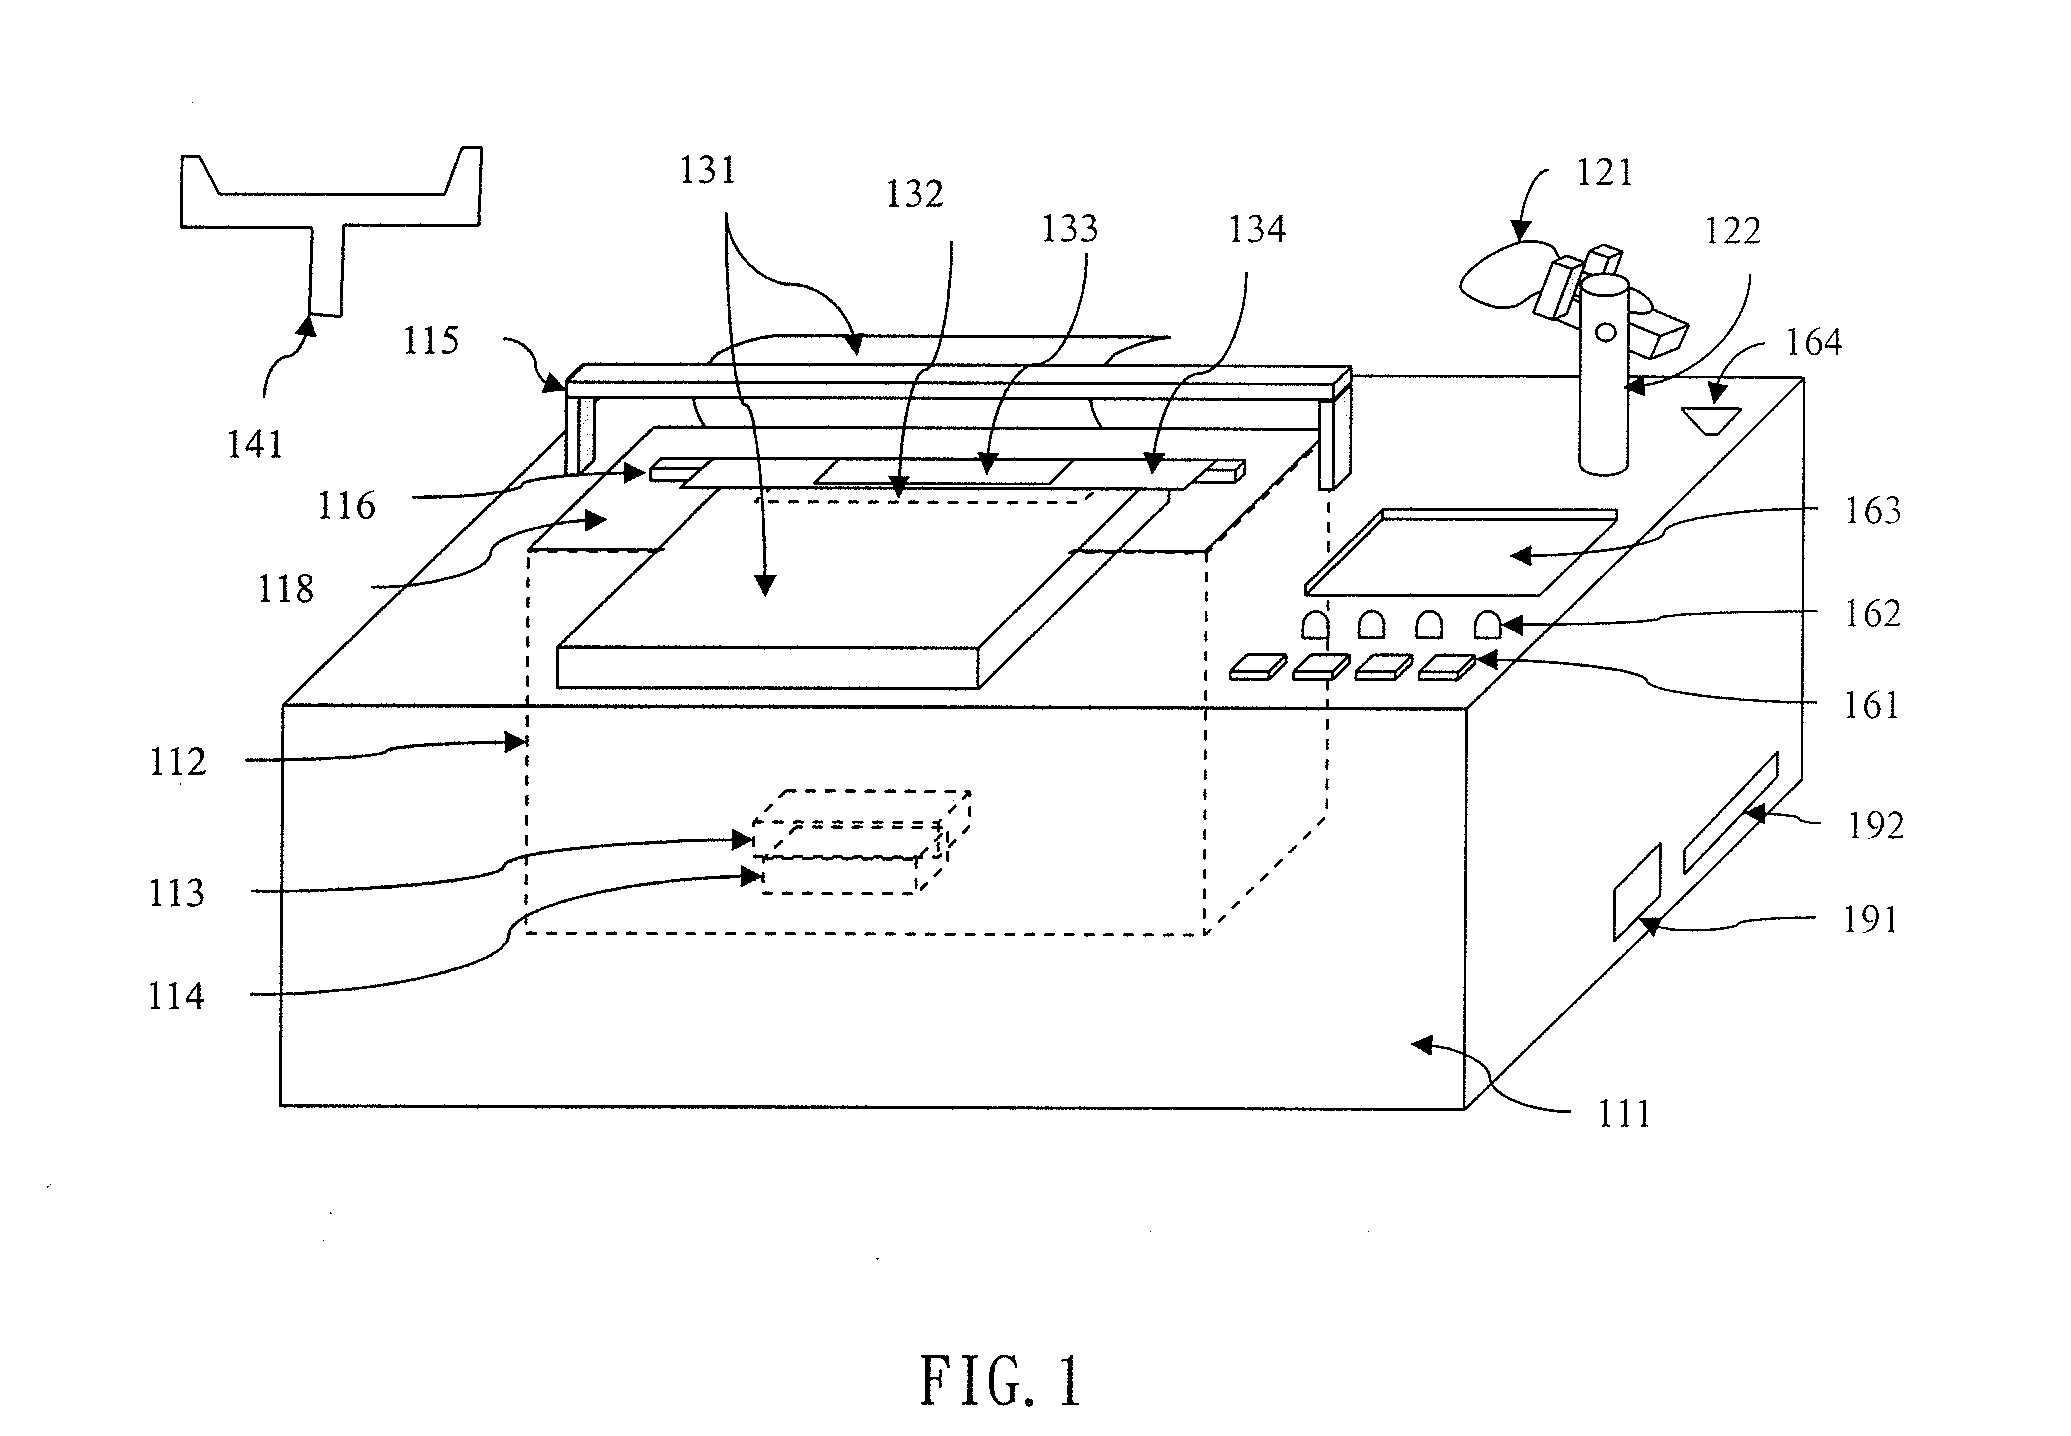 RFID-based book tagging device and method